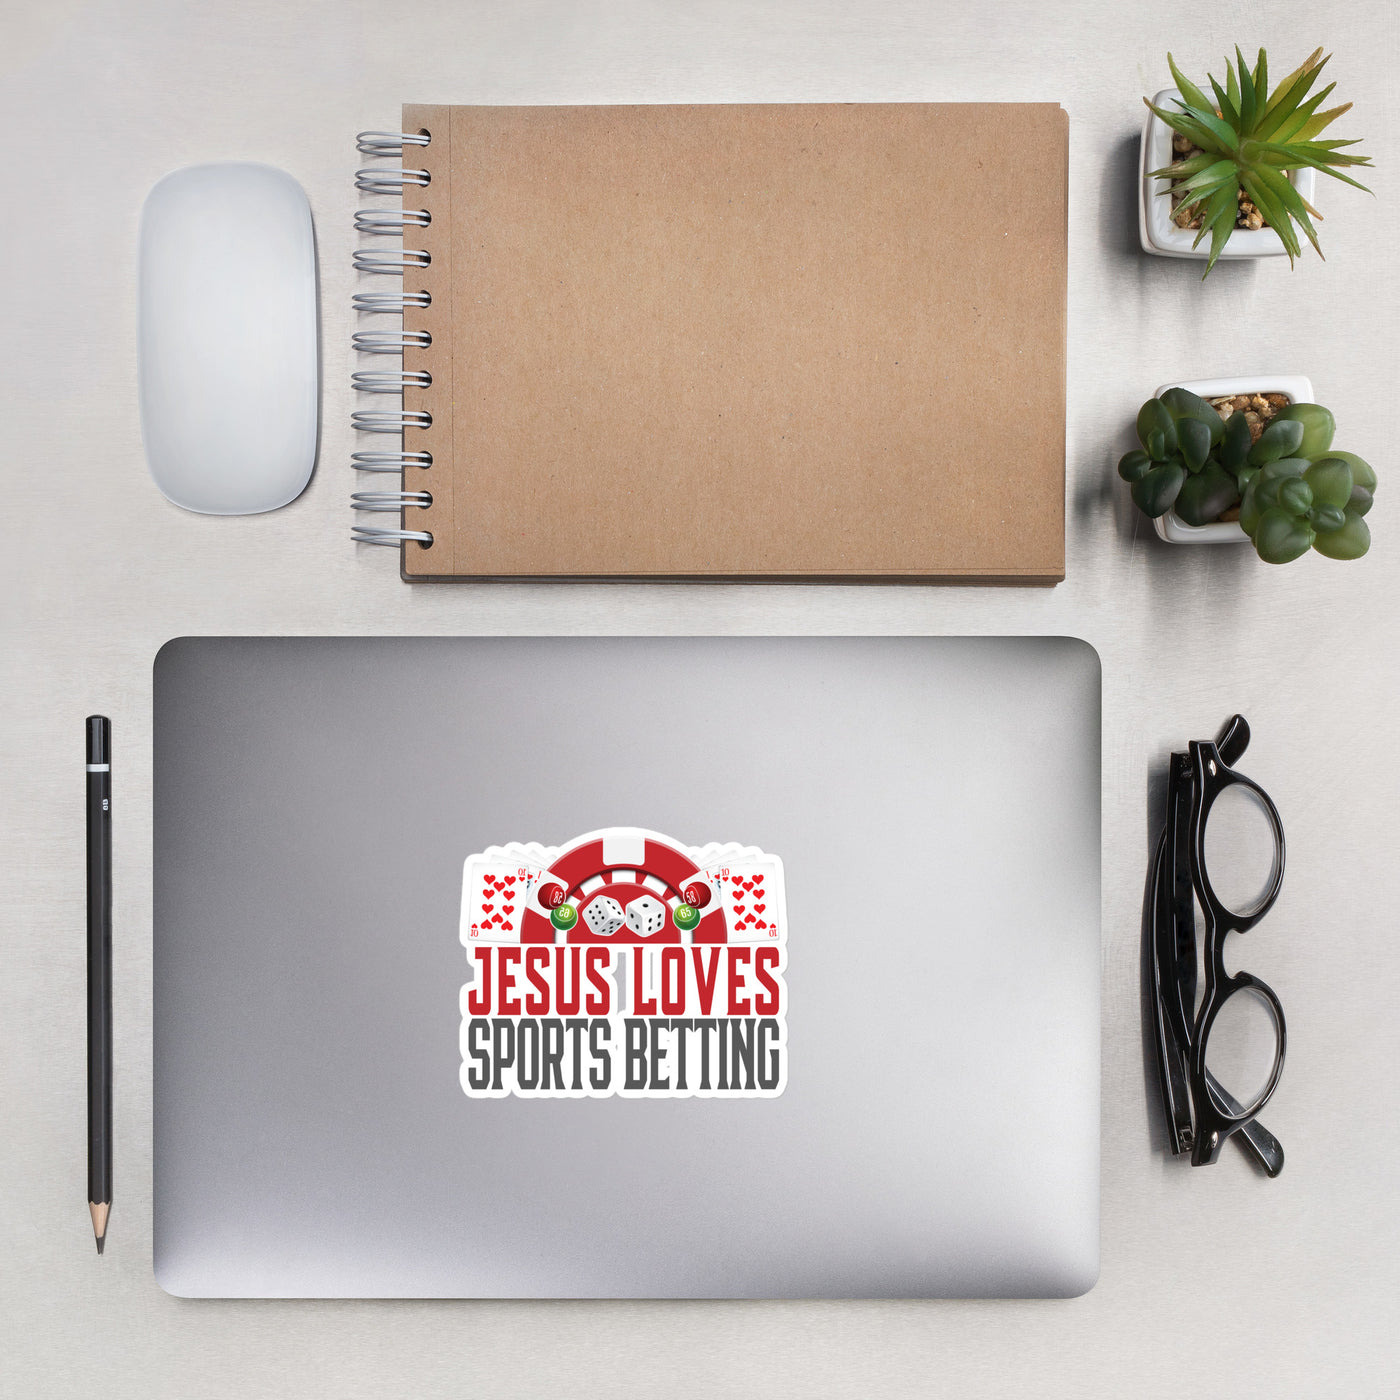 Jesus Loves Sports Betting - Bubble-free stickers